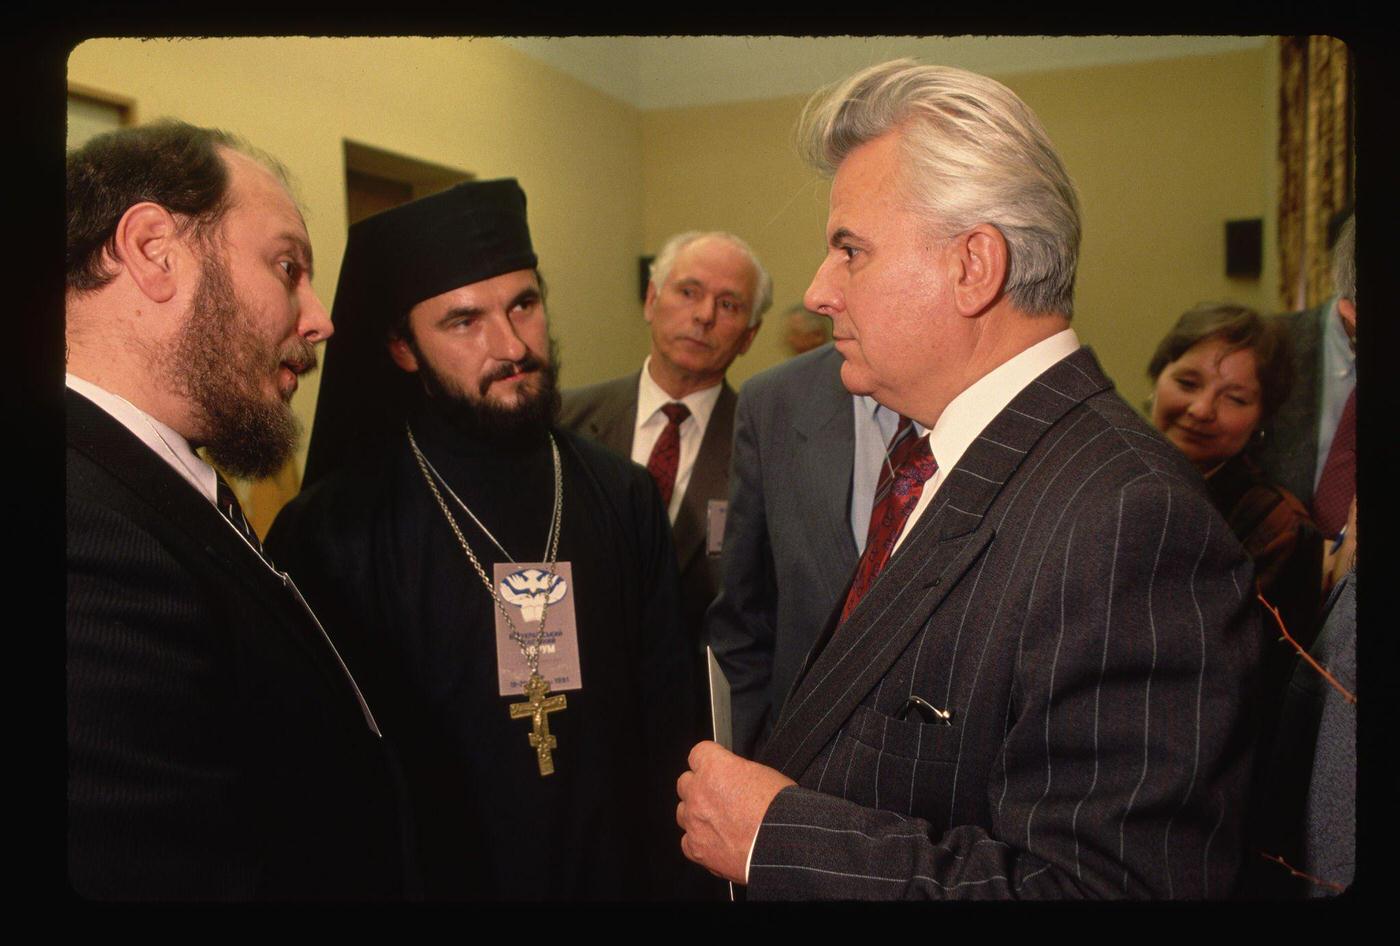 Candidate Kravchuk Meets with Church Leaders Before Presidential Election, 1991